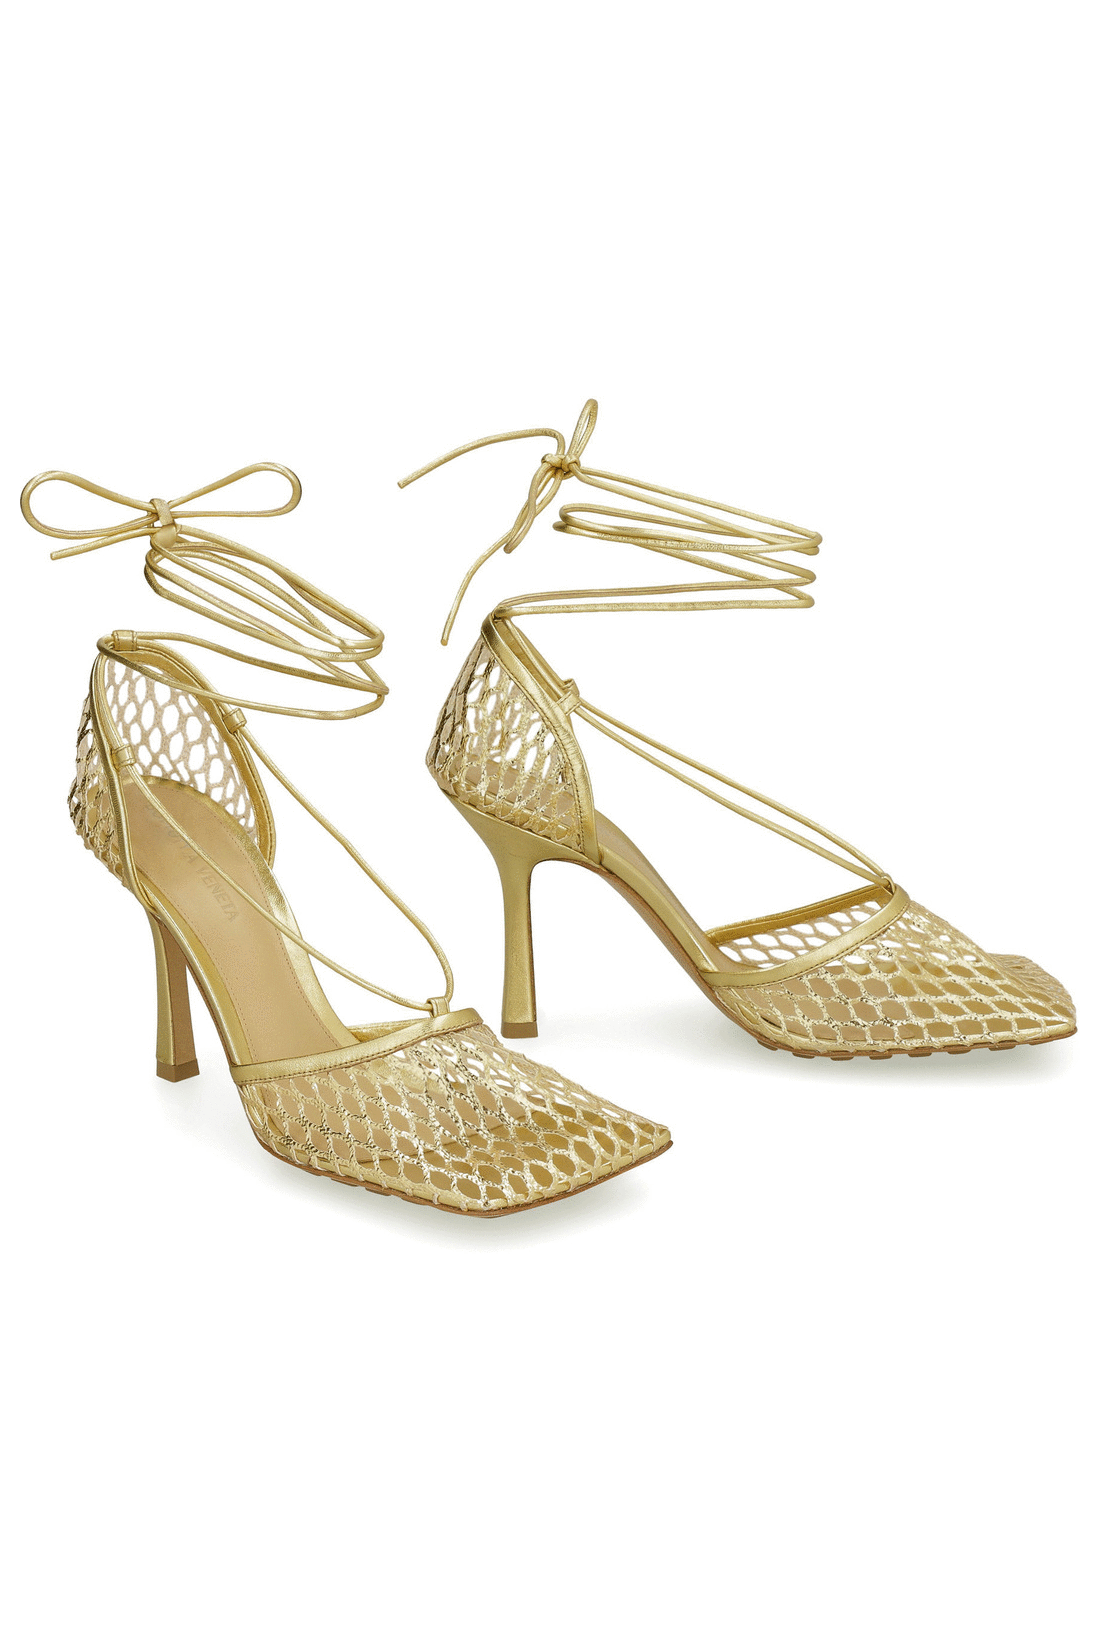 Stretch metallic leather and mesh sandals